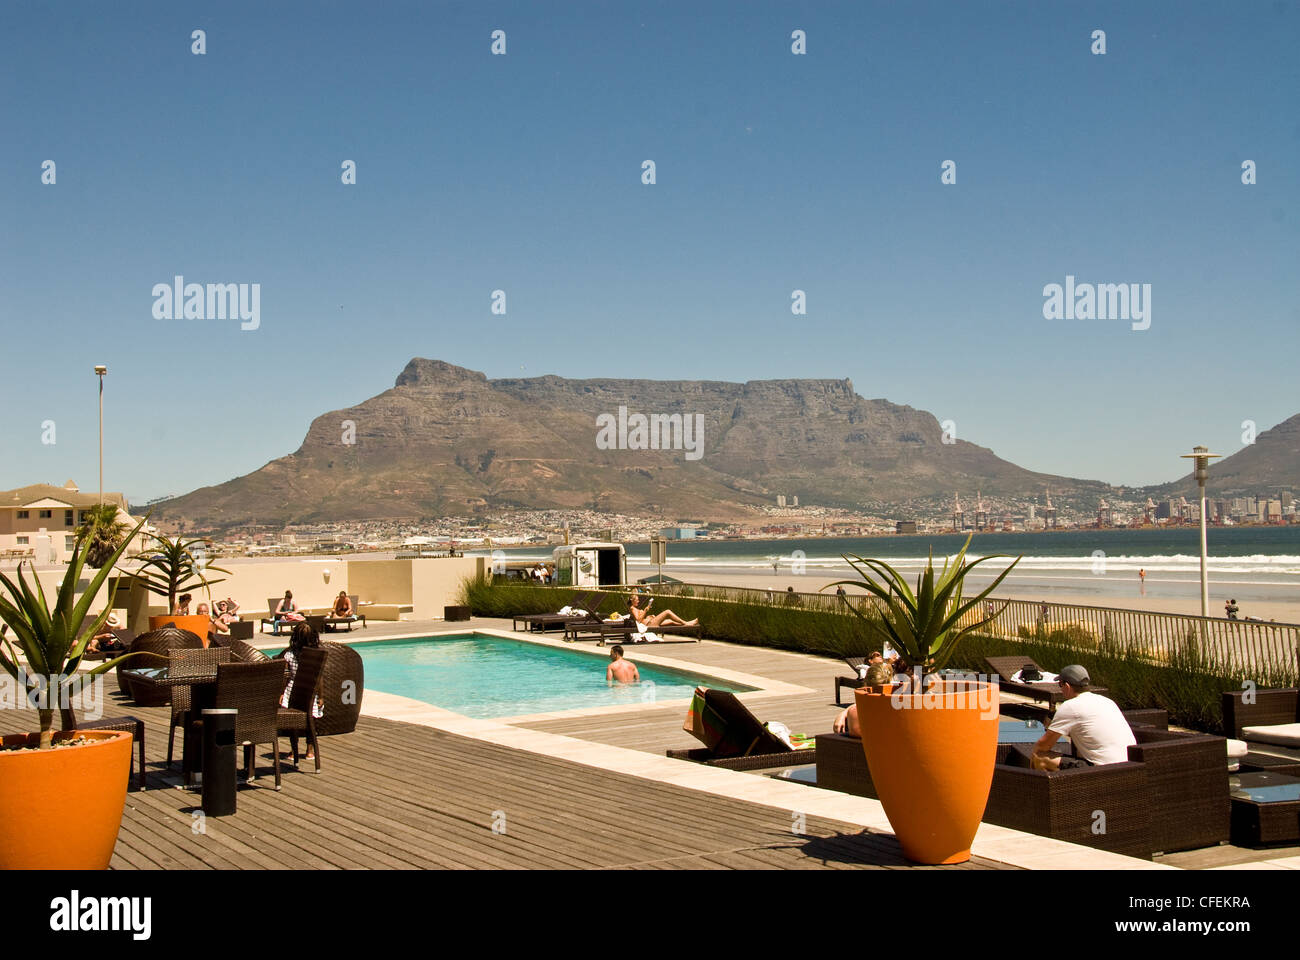 Table Mountain and Cape Town as seen from the pool deck at The Dolphin Beach Hotel, Milnerton. Stock Photo